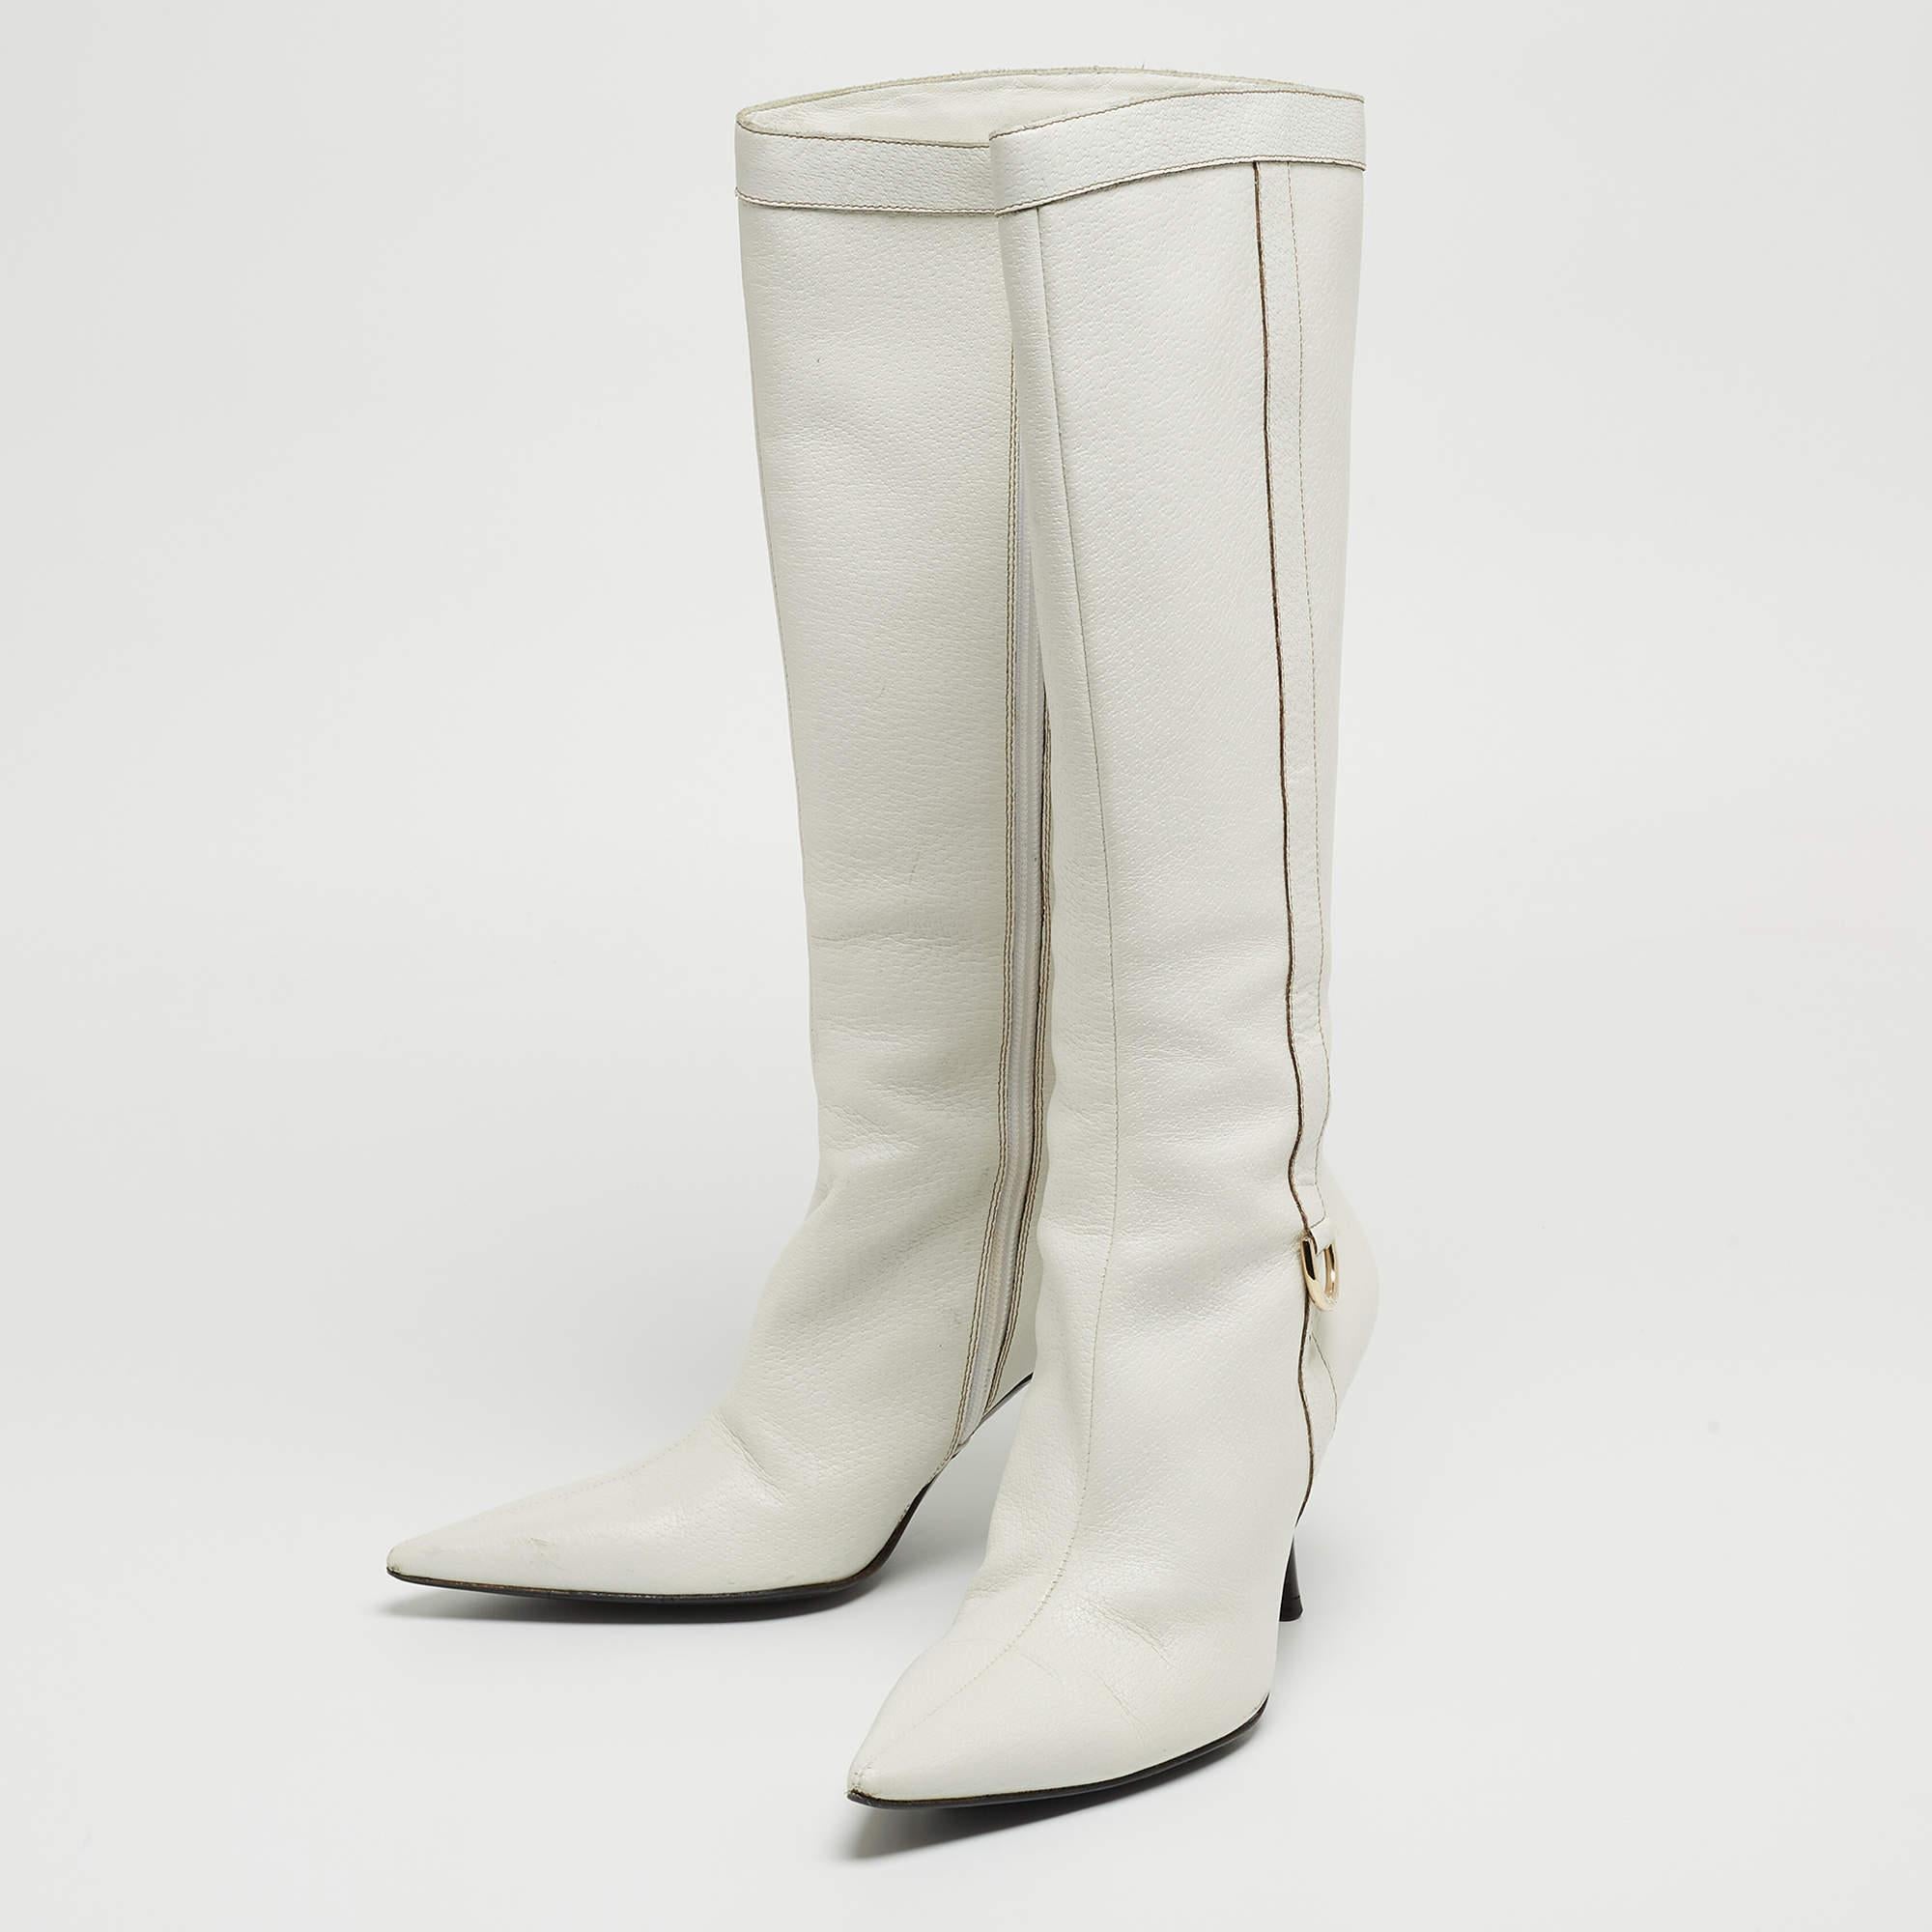 Gucci White Leather Pointed Toe Knee Length Boots Size 41 For Sale 4